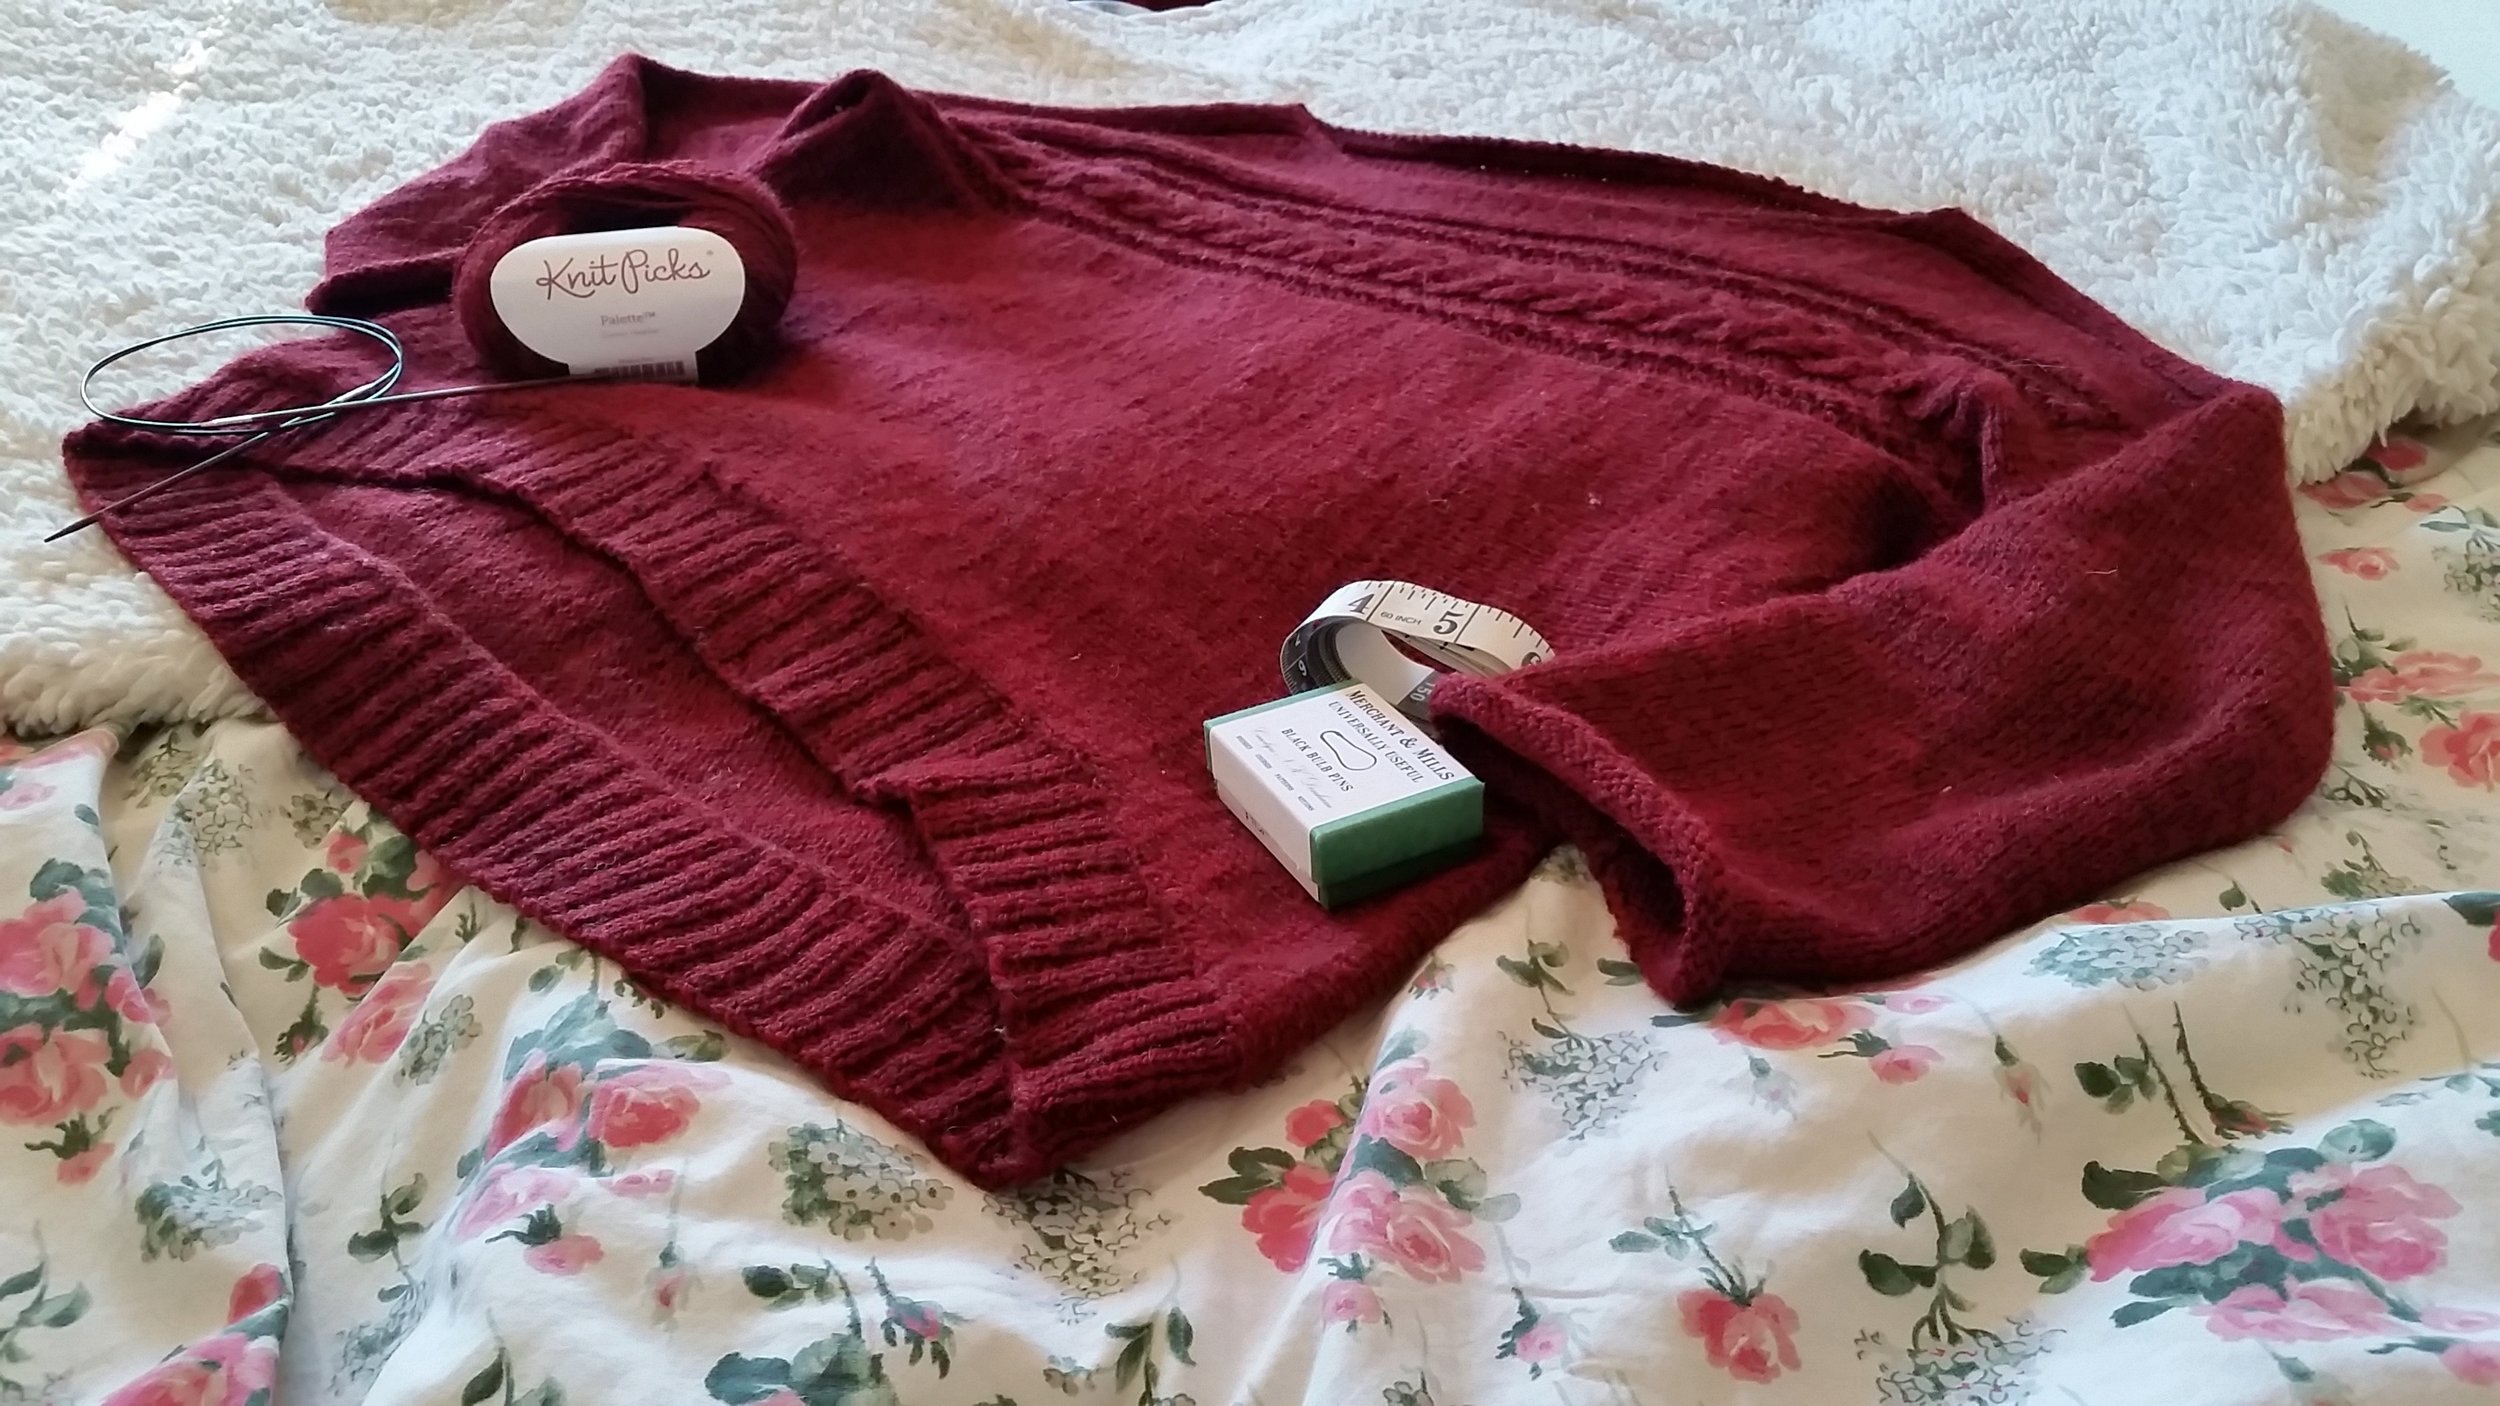 A red knit pullover with a cable that runs horizontally across the chest is laid flat against a floral bedspread and a fuzzy blanket.